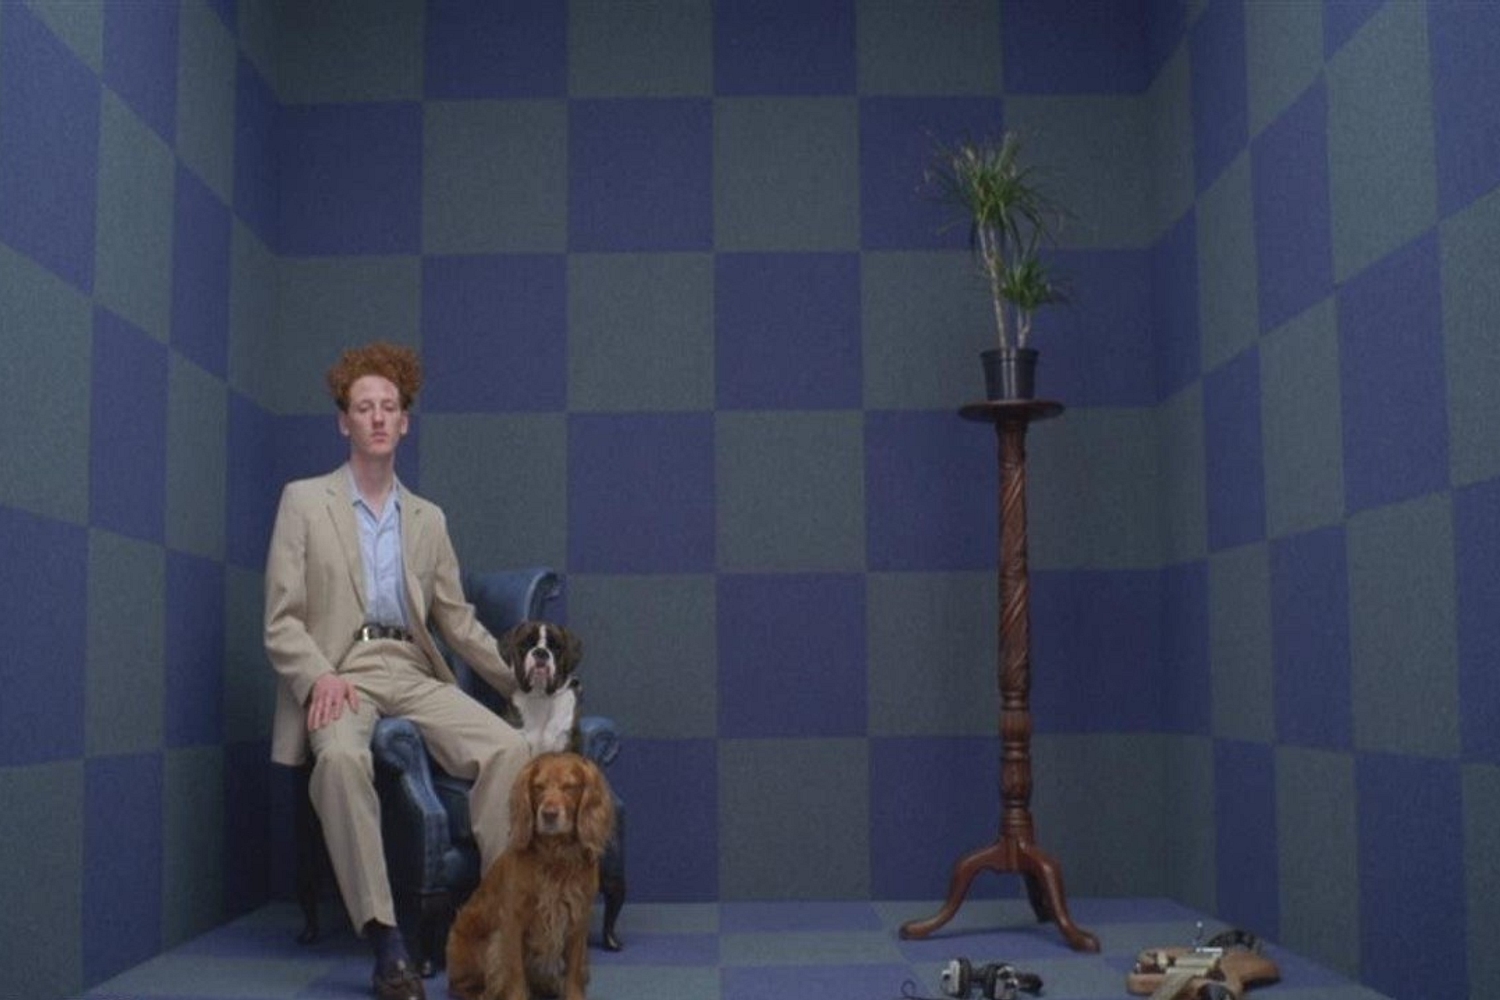 Willie J Healey hangs out in the video for ‘People and Their Dogs’